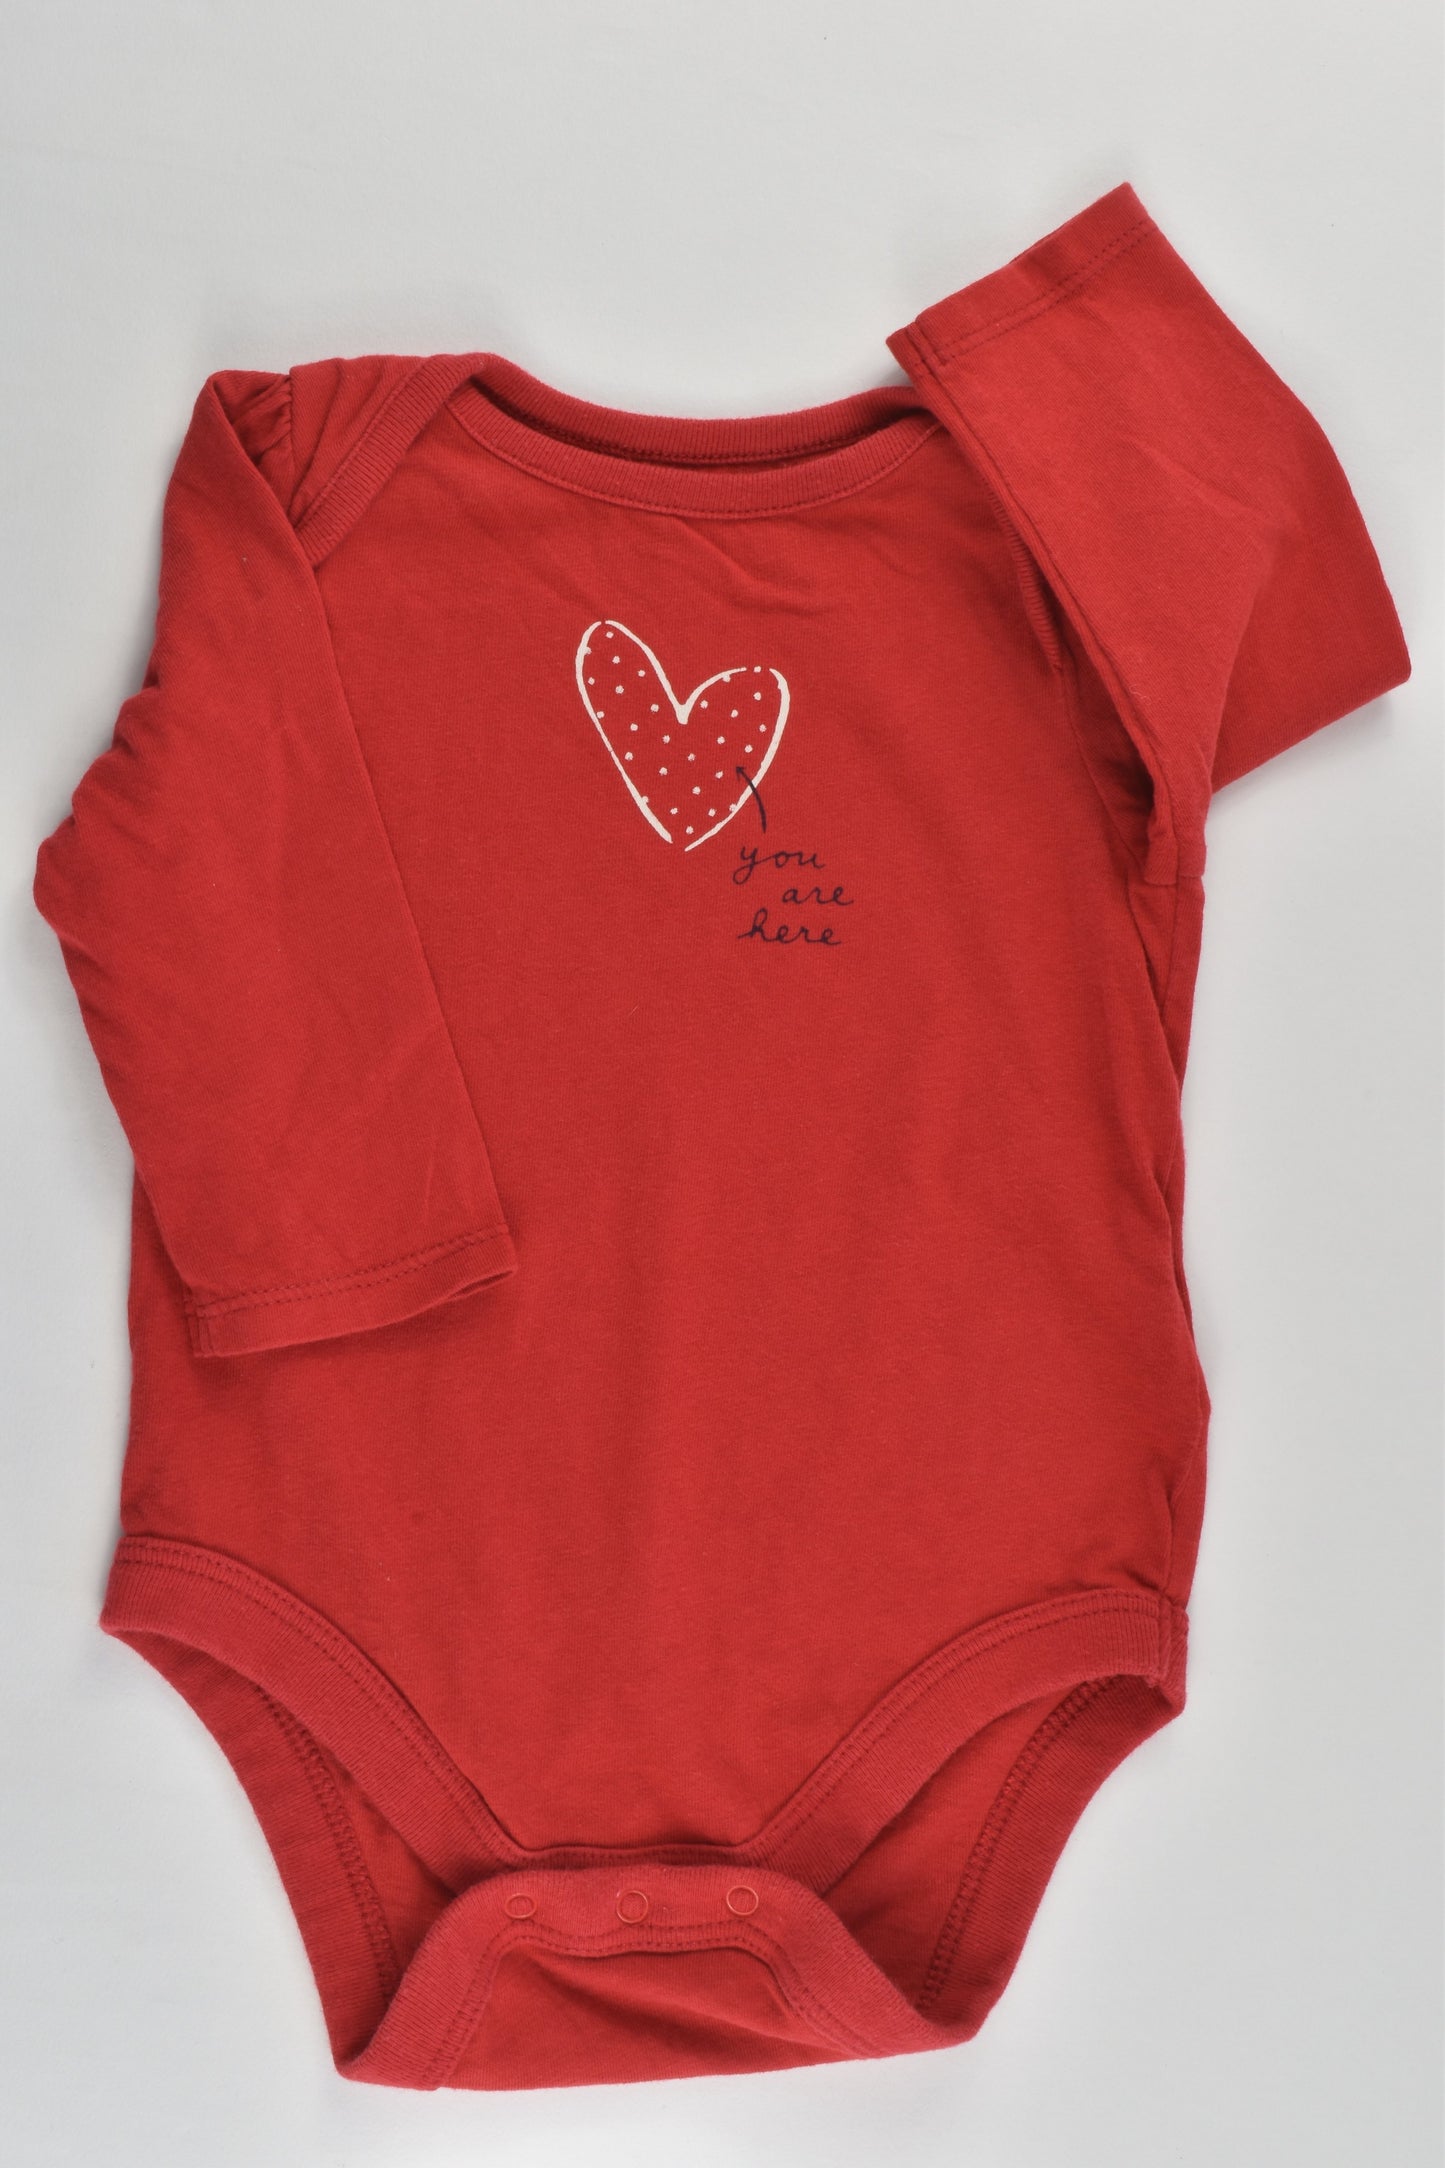 Baby Gap Size 00 (3-6 months) 'You Are Here' Bodysuit